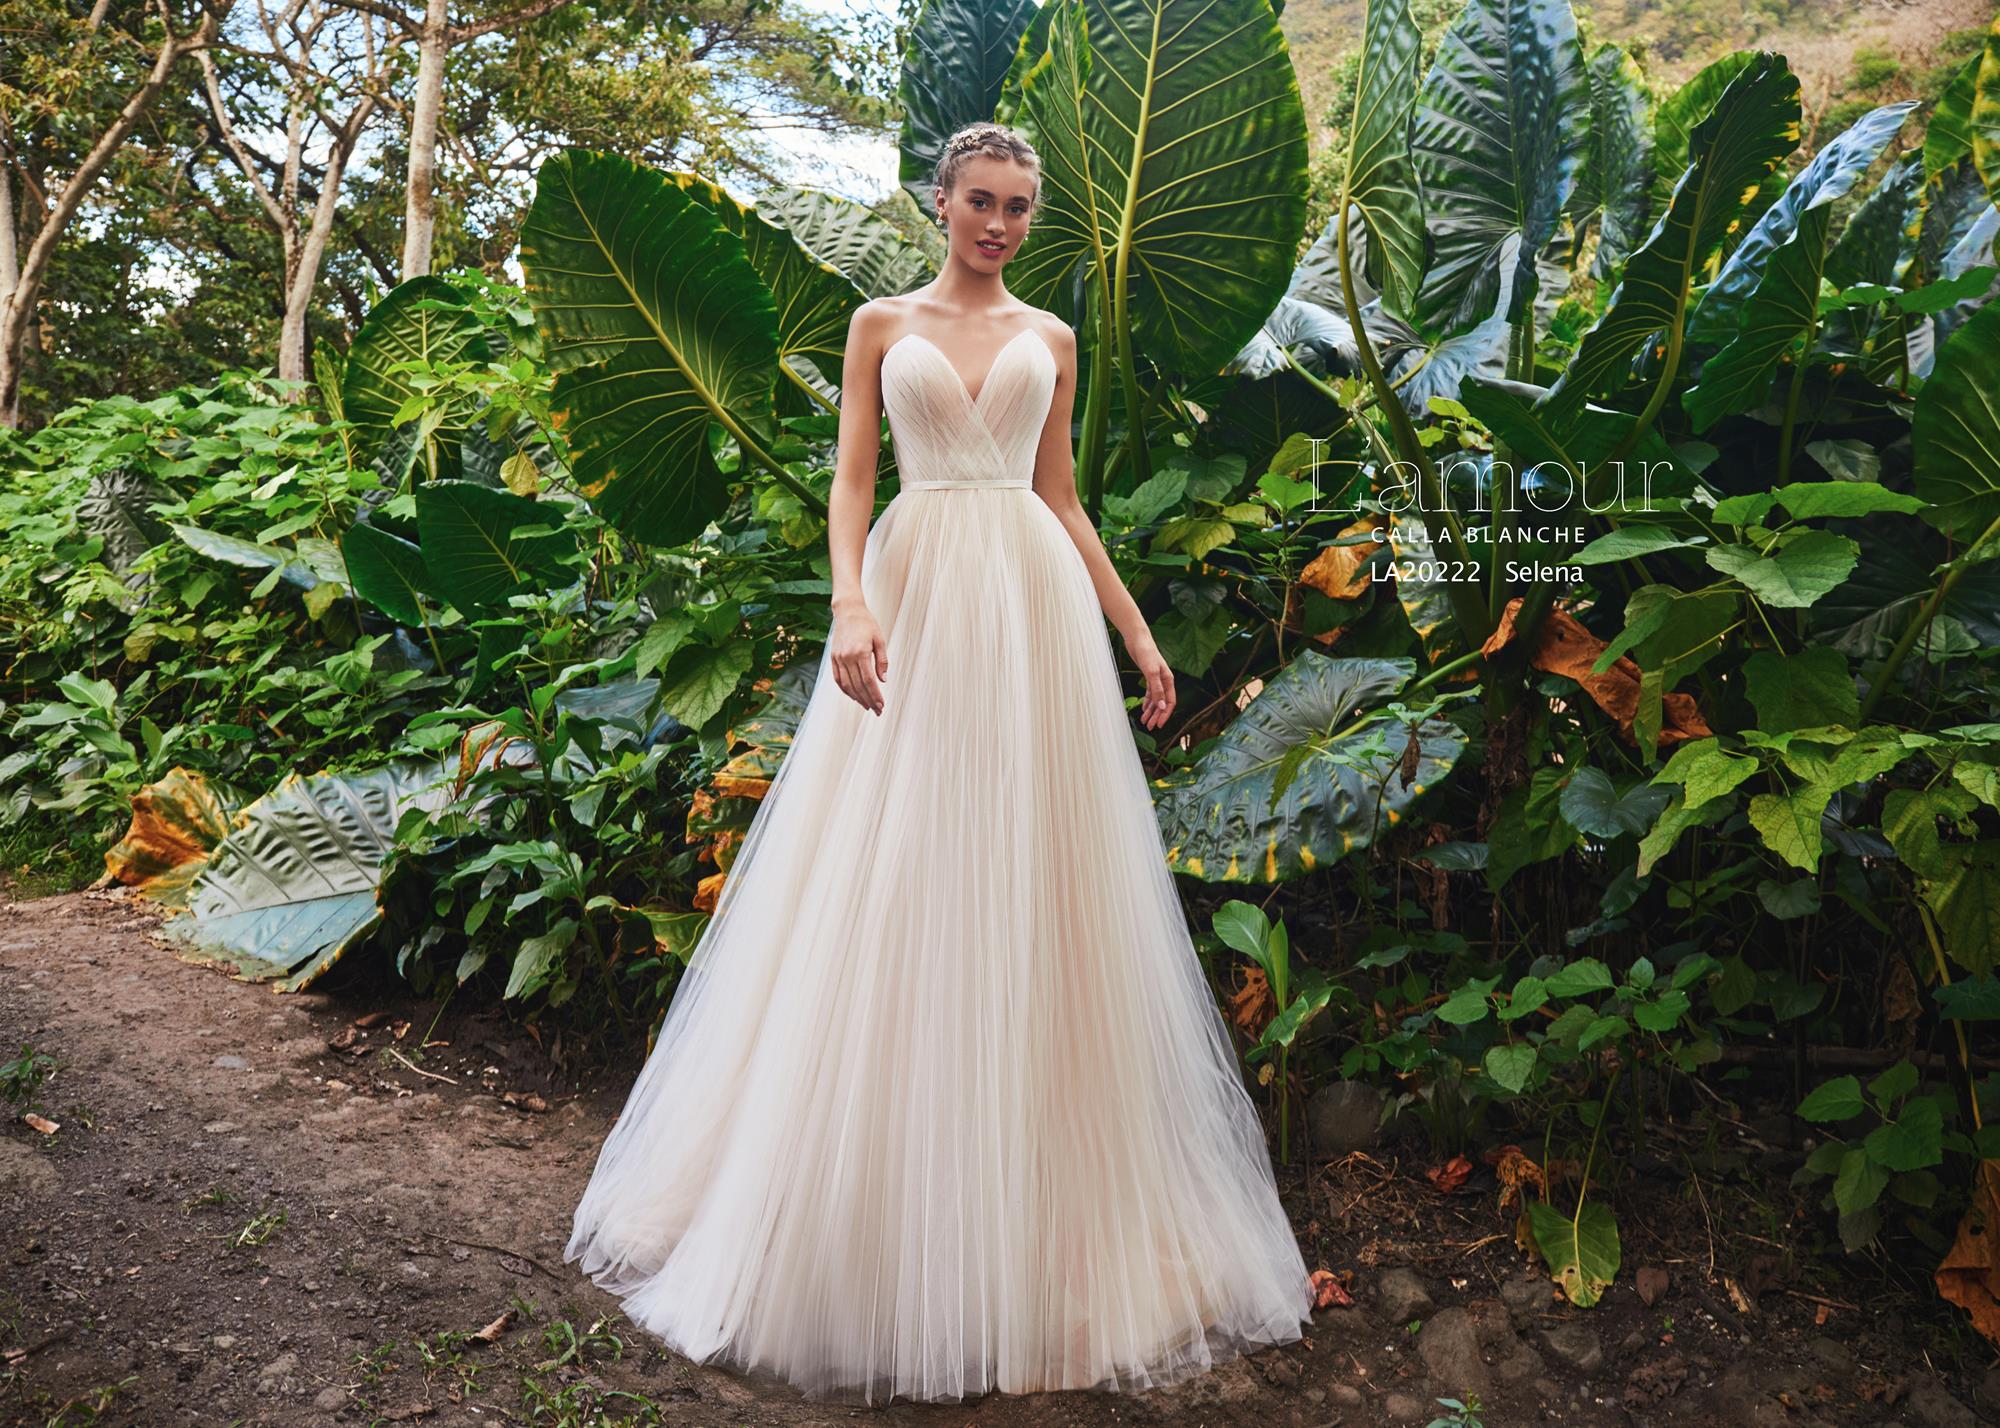 Spaghetti Strap Aline Ball Gown Wedding Dress With Vneckline Beaded Lace  Bodice And Feathered Tulle Skirt  Kleinfeld Bridal